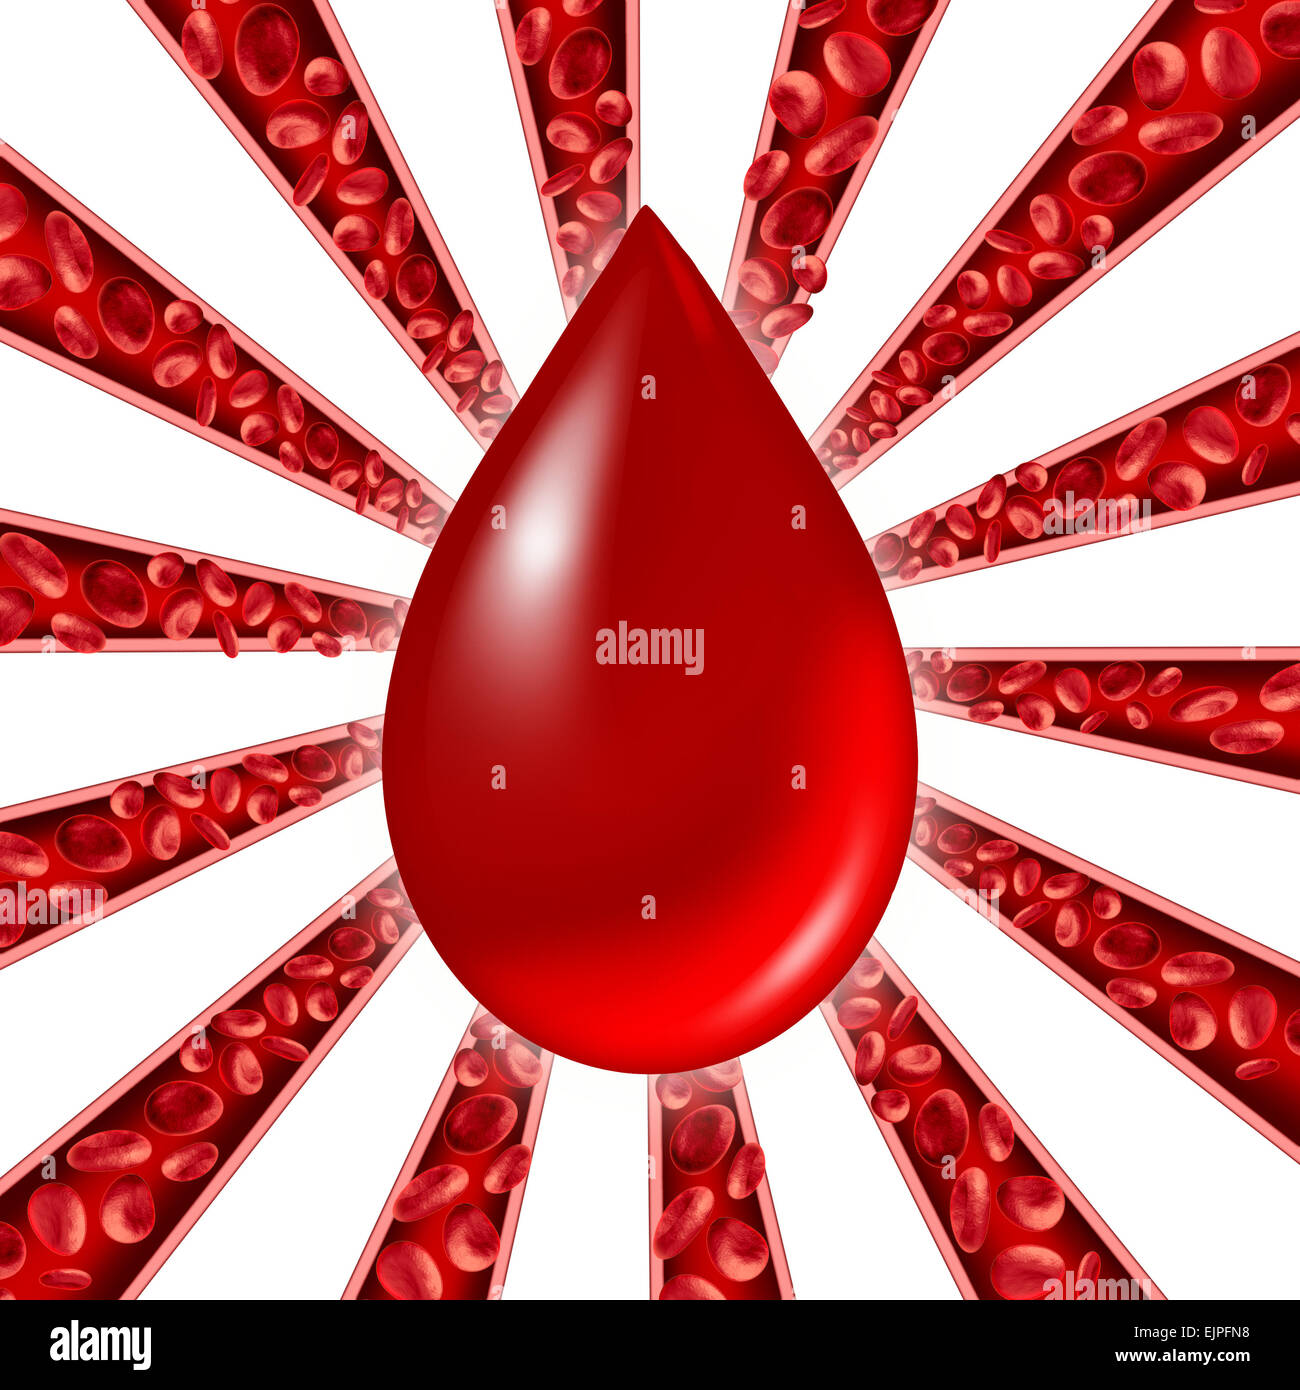 Blood donation symbol as red cells flowing through veins and human circulatory system with a group of arteries shaped as a starburst pattern representing a cardiovascular medical health care symbol. Stock Photo